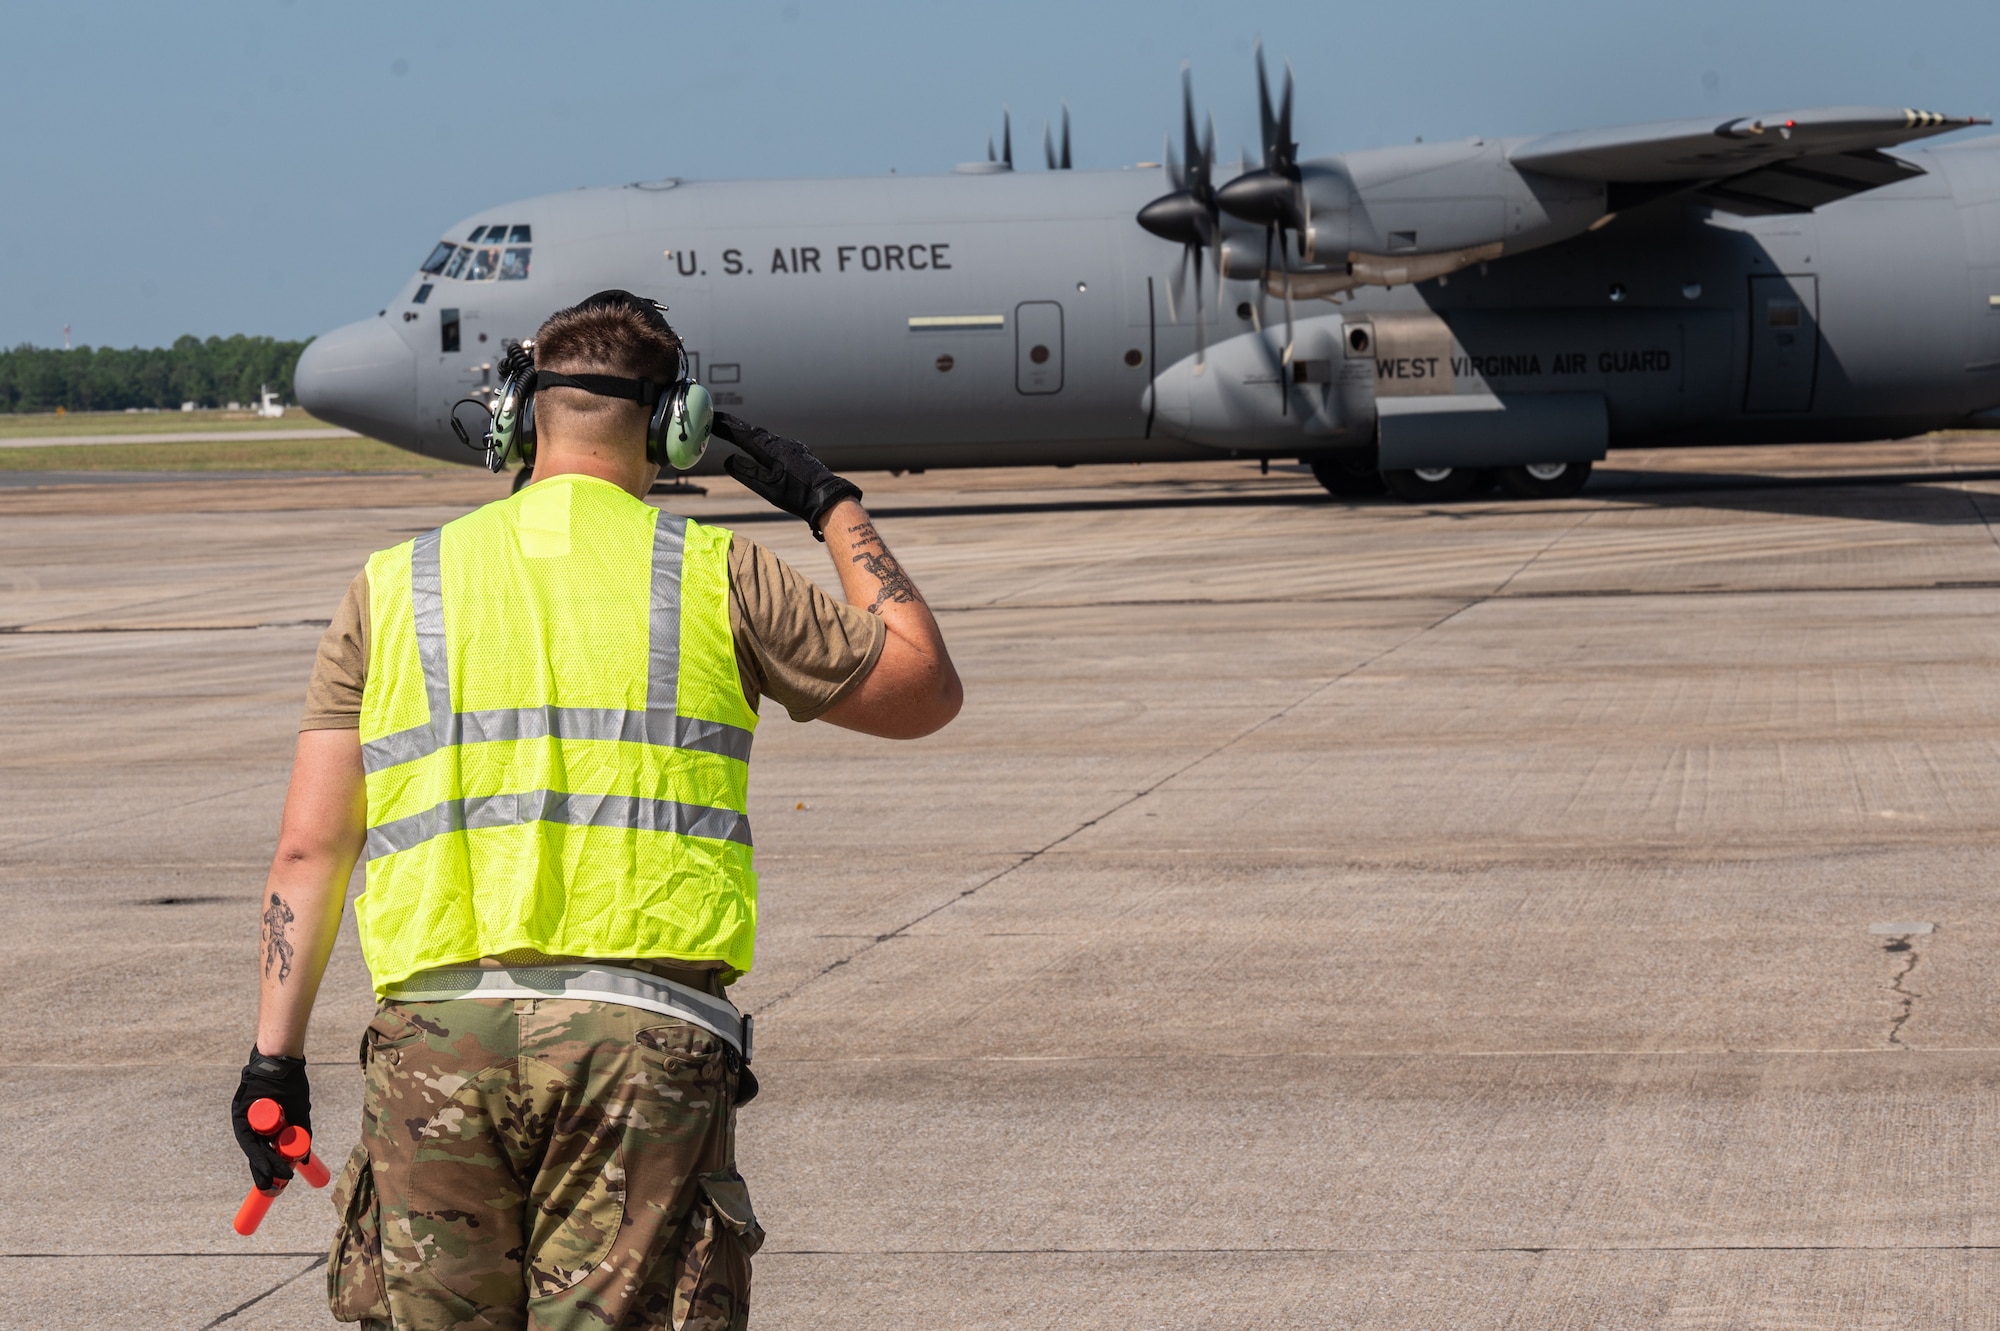 An airman assigned to the 130th Airlift Wing salutes a C-130J-30 before taking off during the unit's Fly Away Readiness Exercise Validation (FLARE-V) held at the Gulfport Combat Readiness Training Center (CRTC), Gulfport, Miss Sept. 8, 2023. FLARE-V is a Commander Directed Readiness Exercise designed to inform commanders of their units' ability to Generate and employ-sustain combat capability across the spectrum of warfare. (U.S. Air National Guard photo by 2nd Lt. De-Juan Haley)